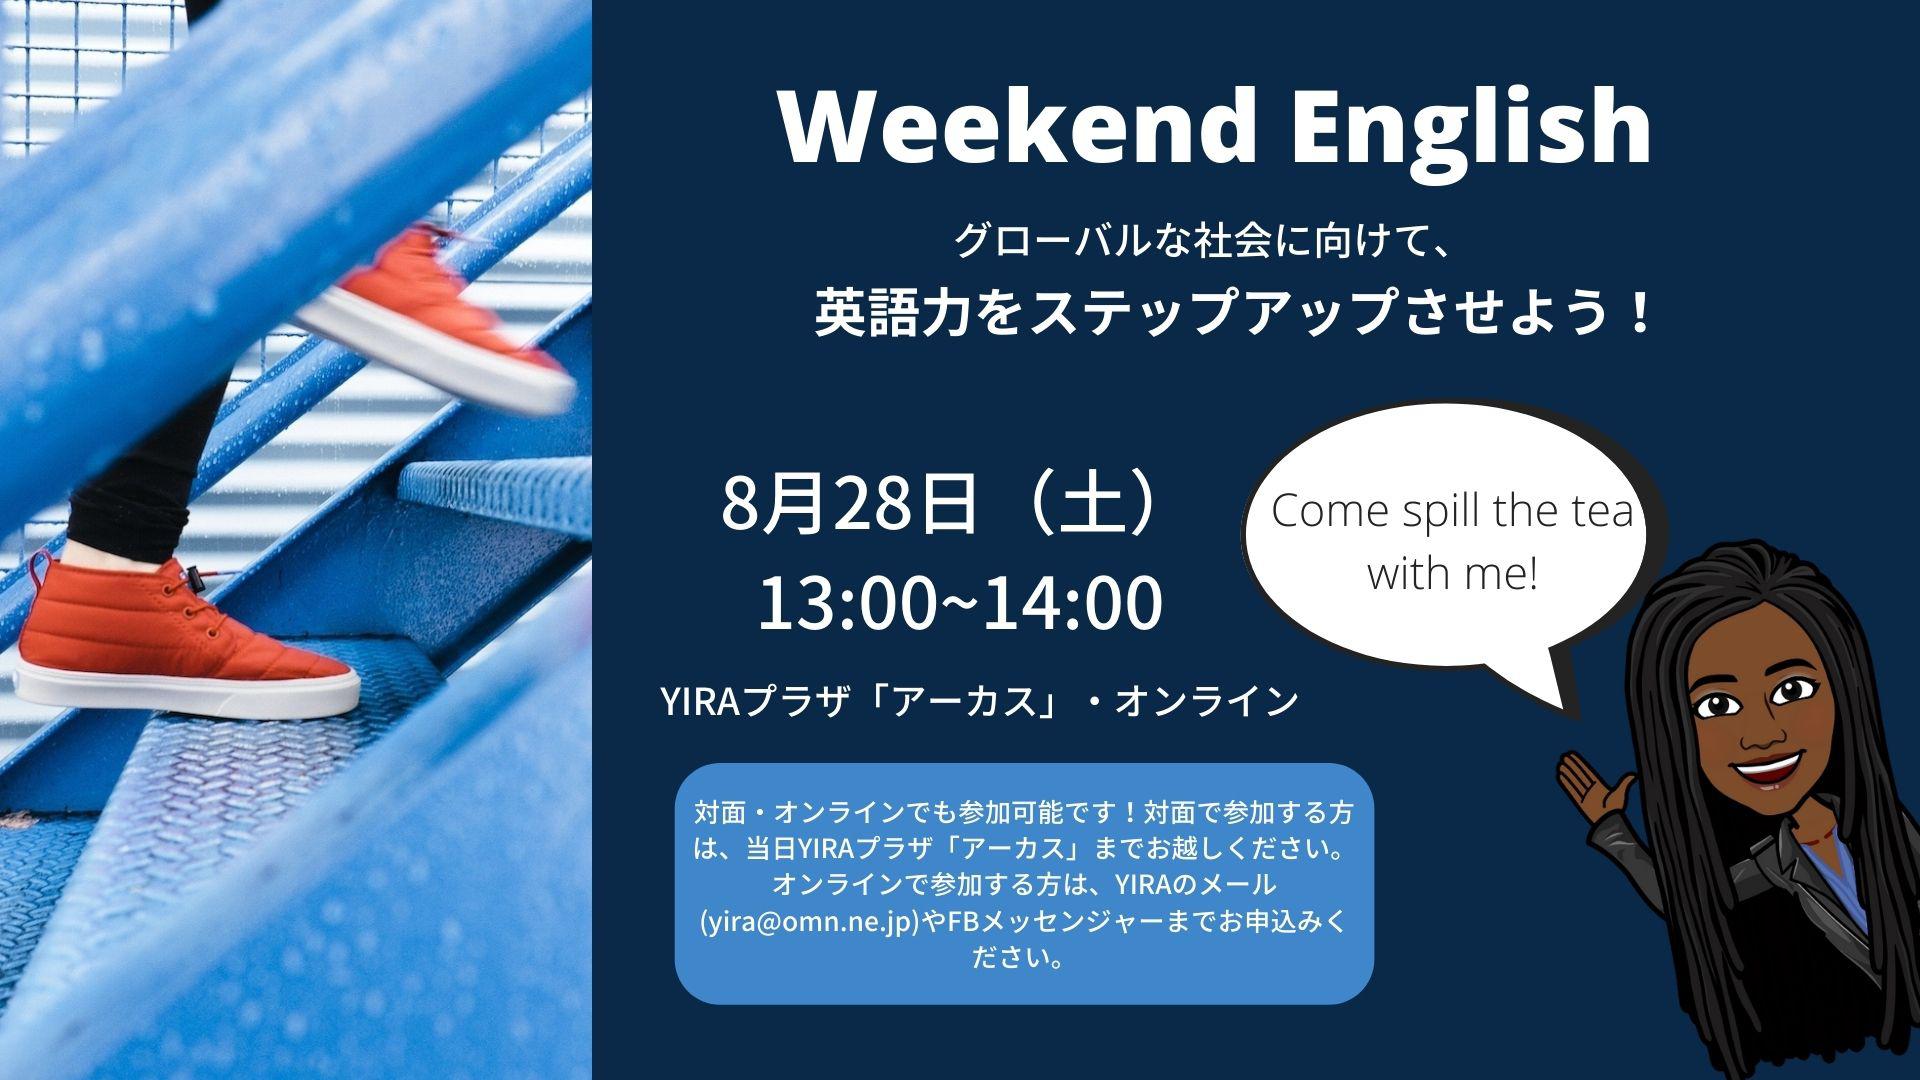 August's Weekend English